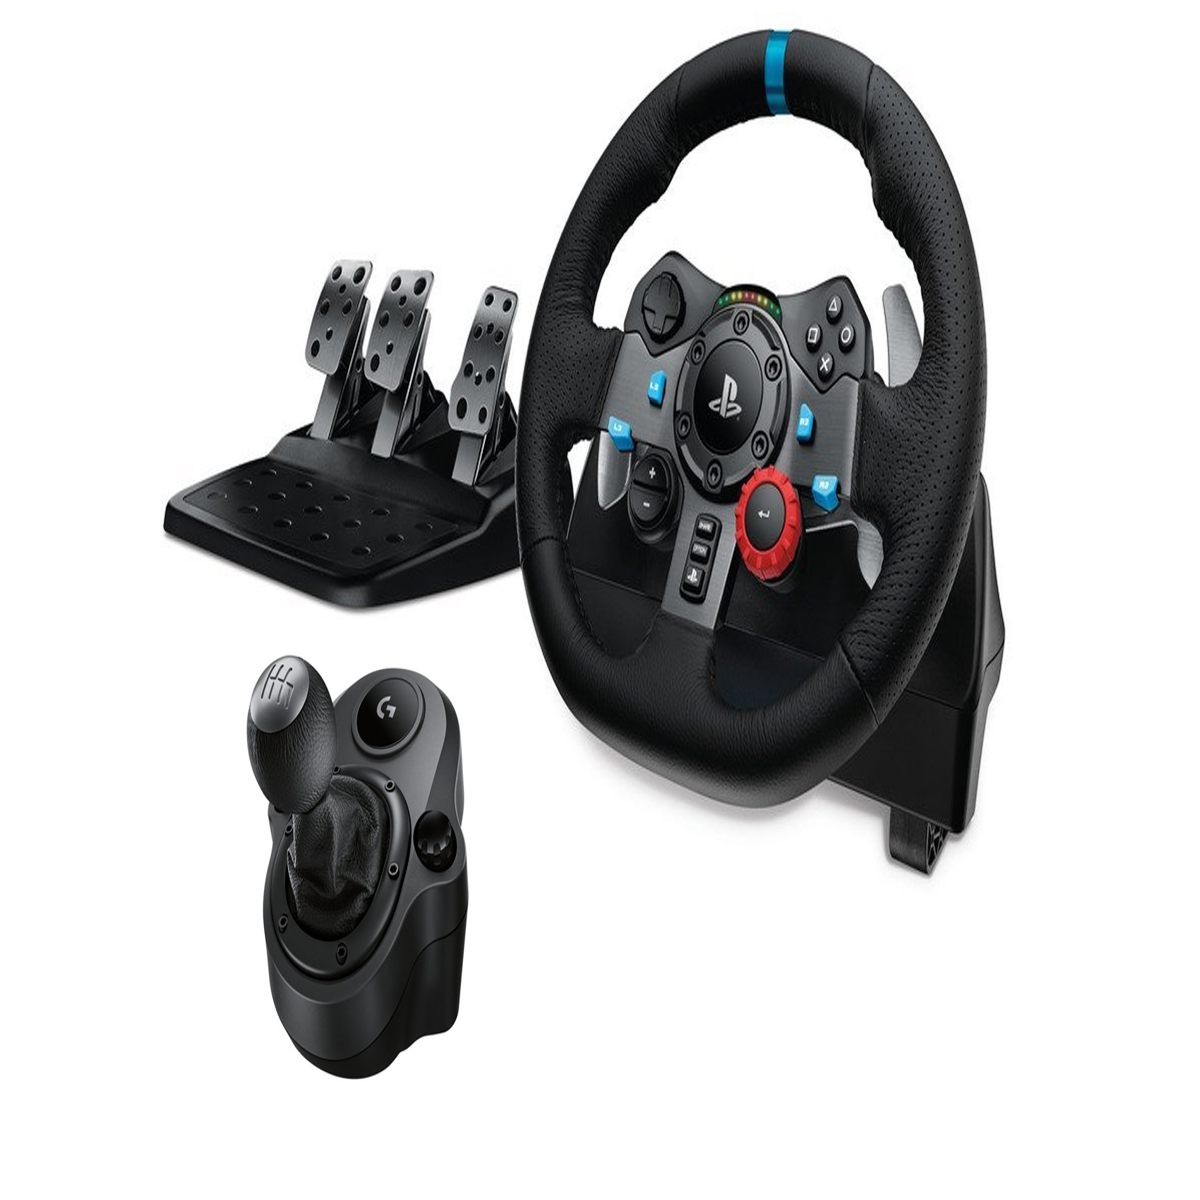 Get Logitech driving game setup with £179 off |